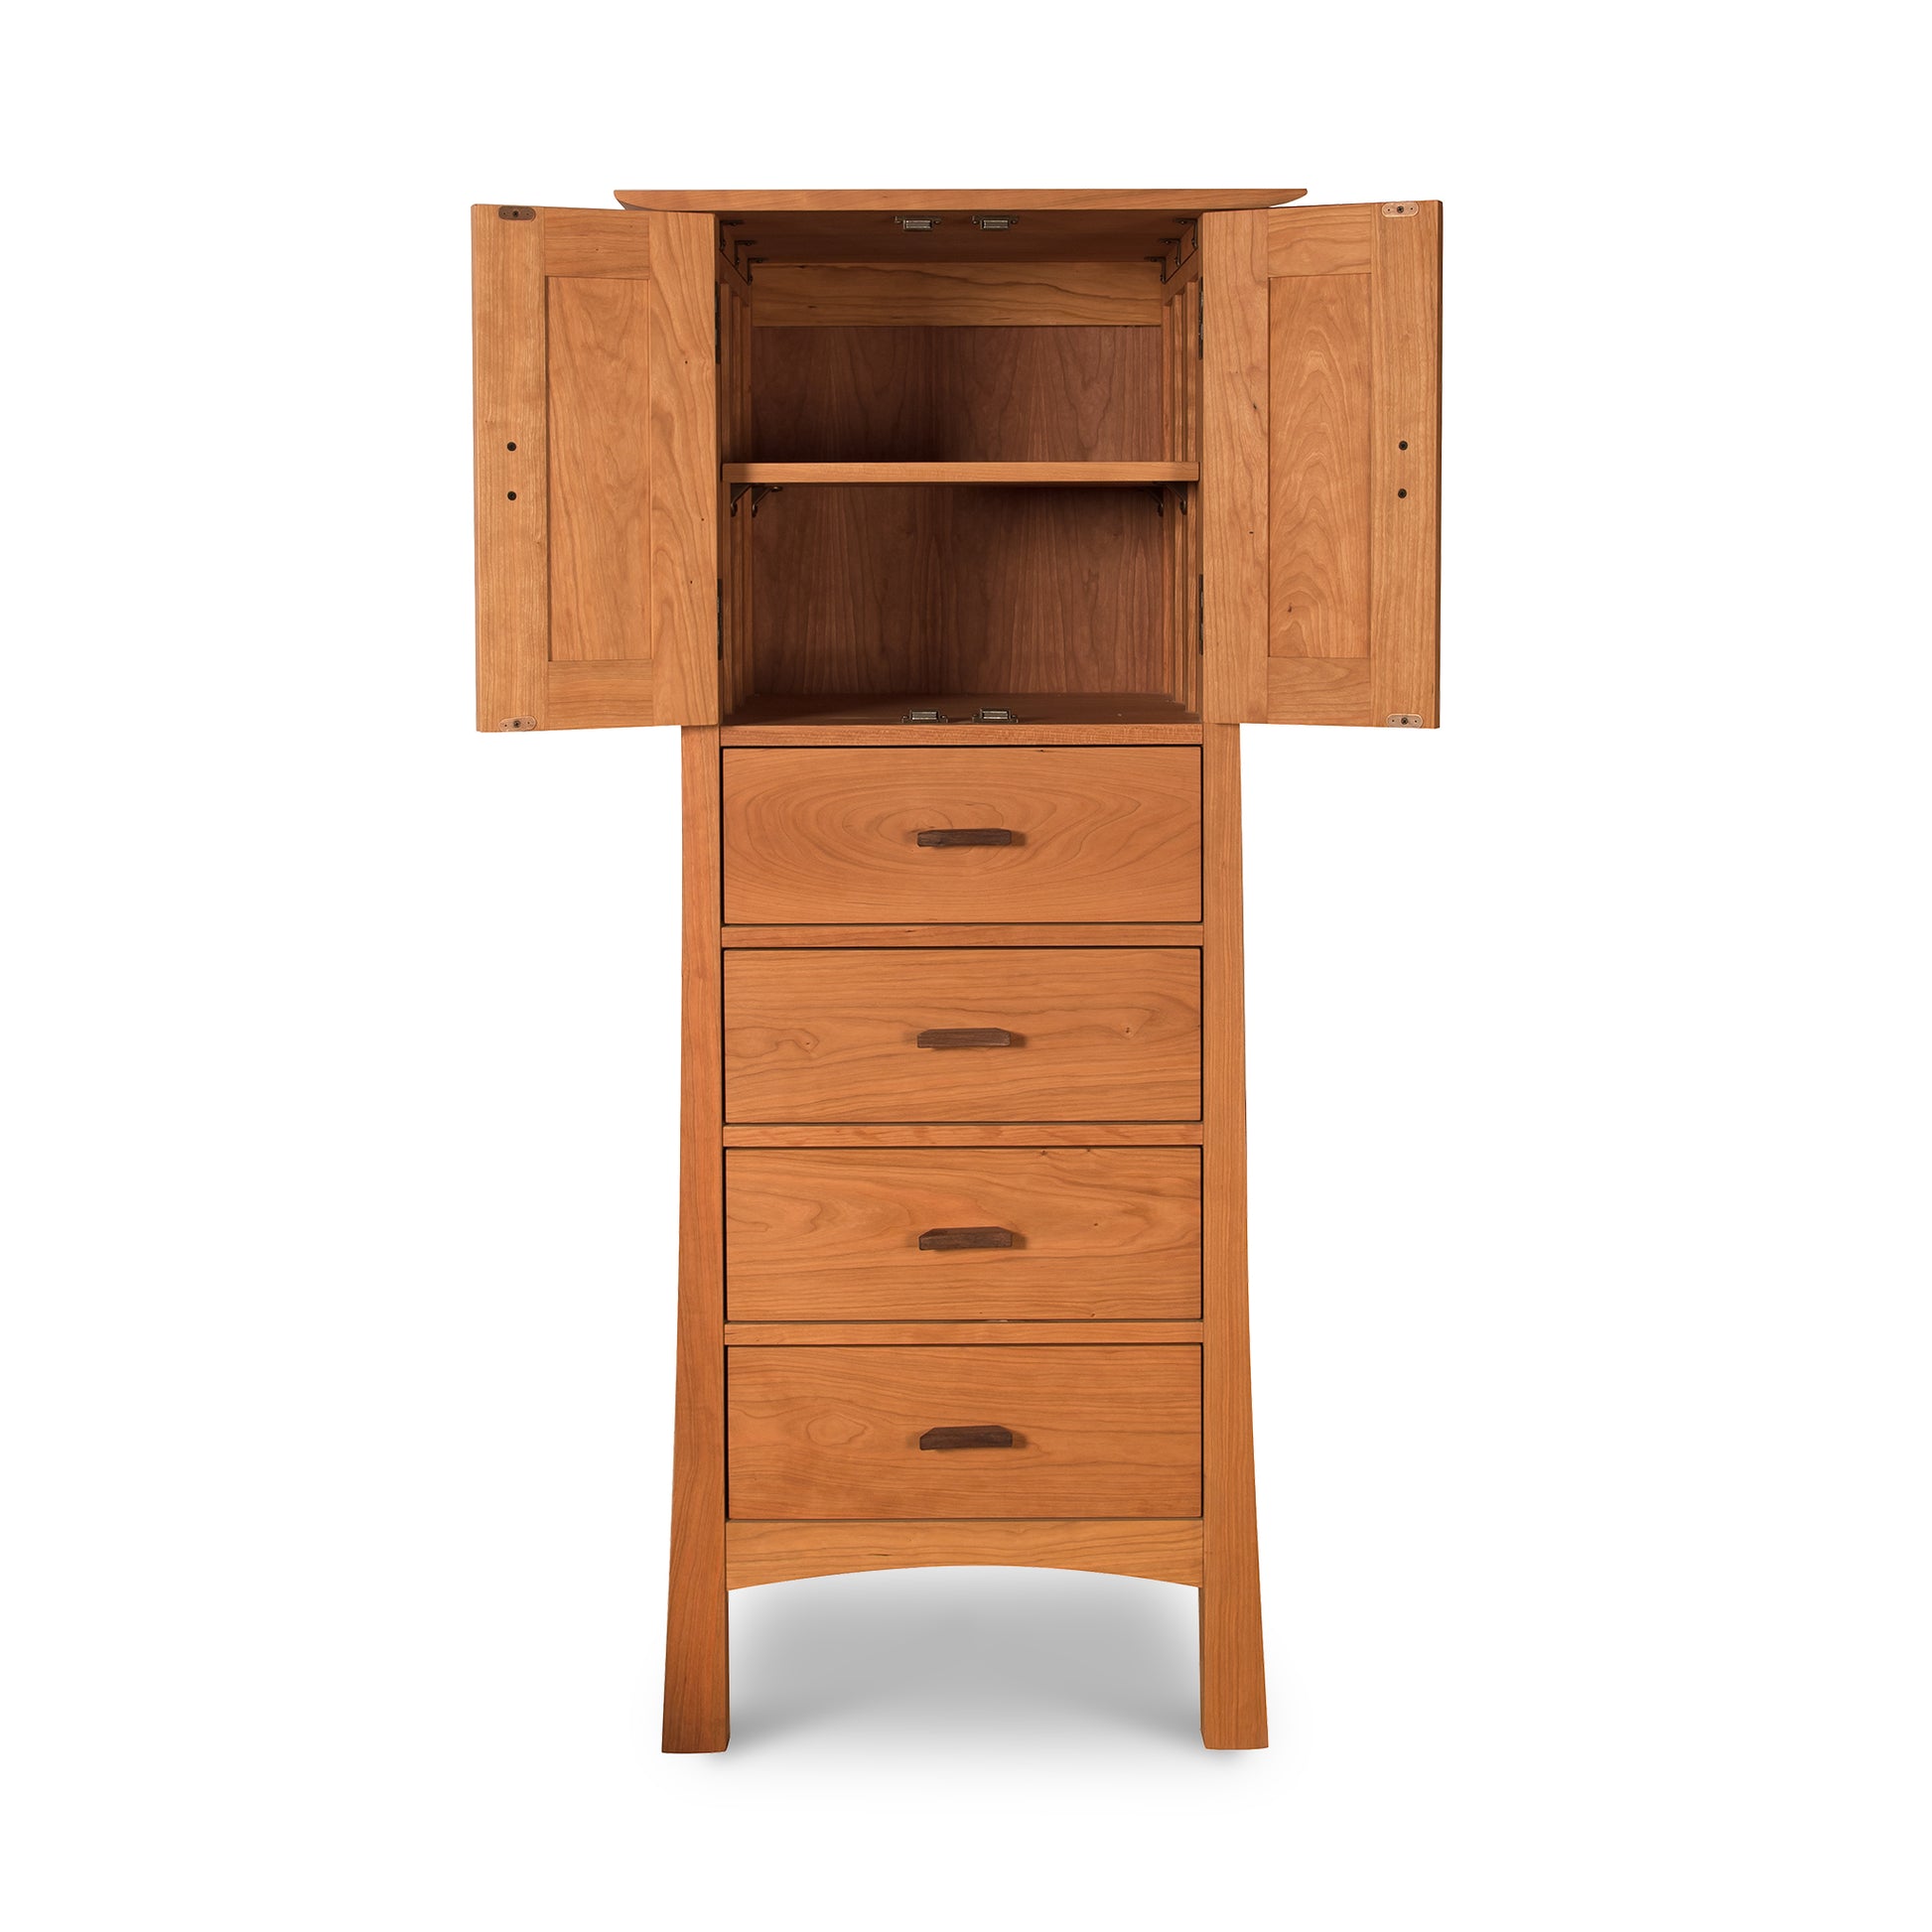 Vermont Furniture Designs Contemporary Craftsman Tall Storage Chest with eco-friendly oil finish, featuring wooden vertical drawers and an open cabinet on top.